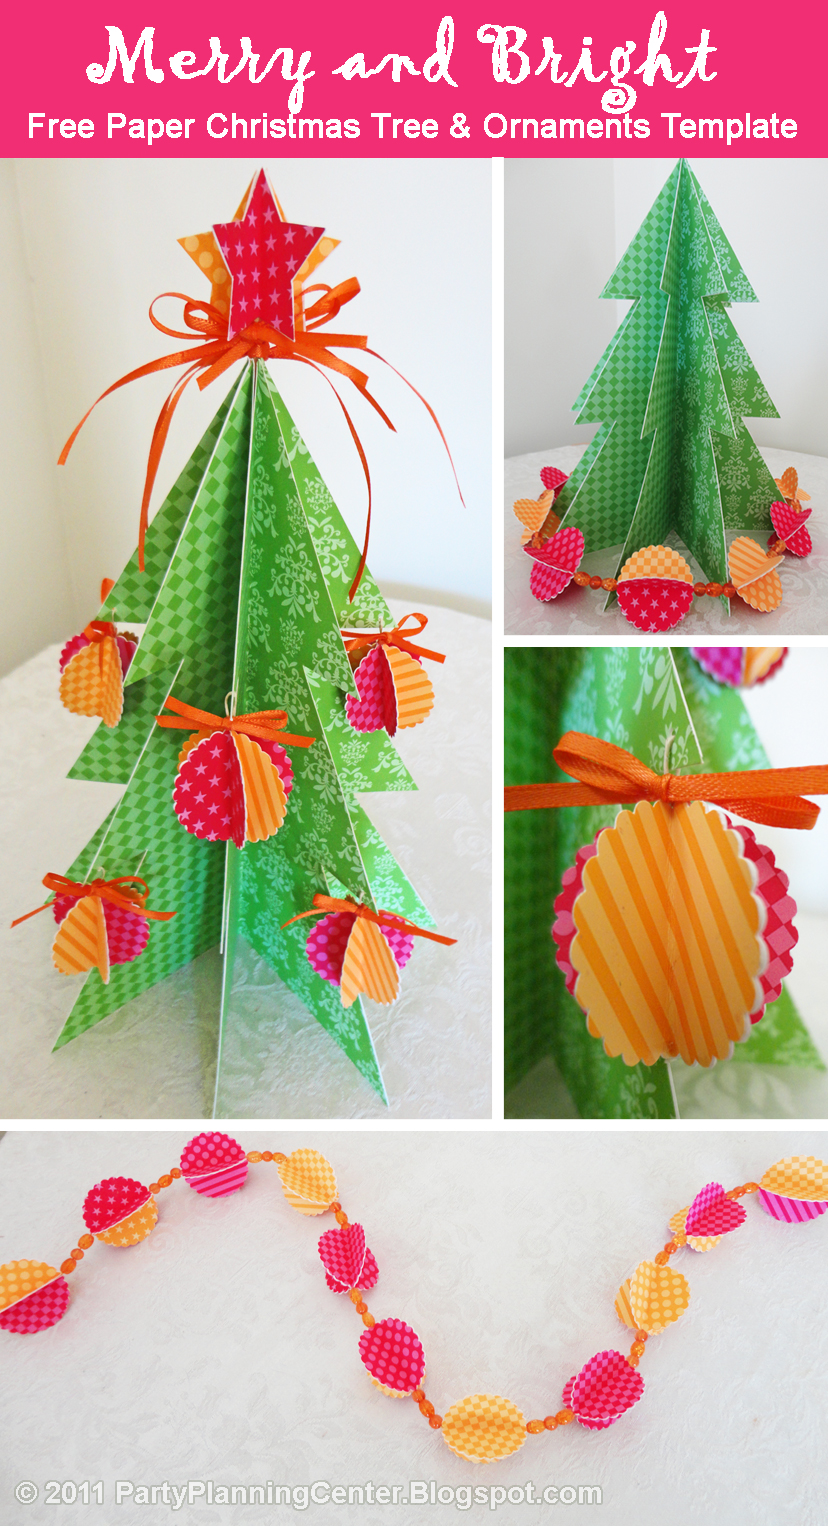 party-planning-center-free-printable-paper-christmas-tree-and-ornaments